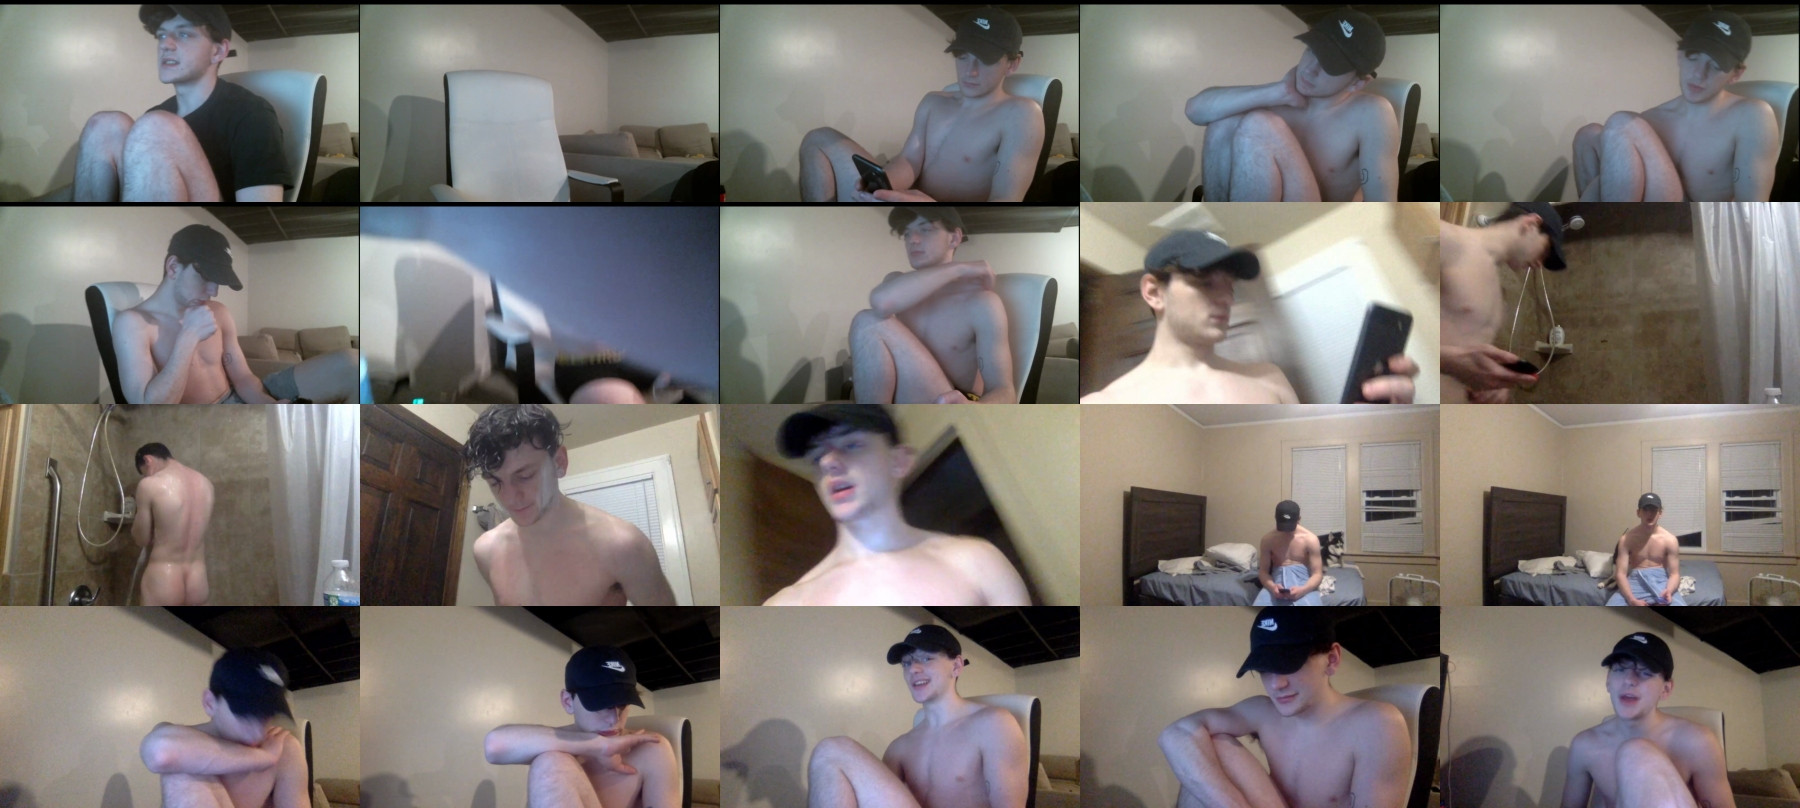 Sexylax69  04-05-2021 Male Show